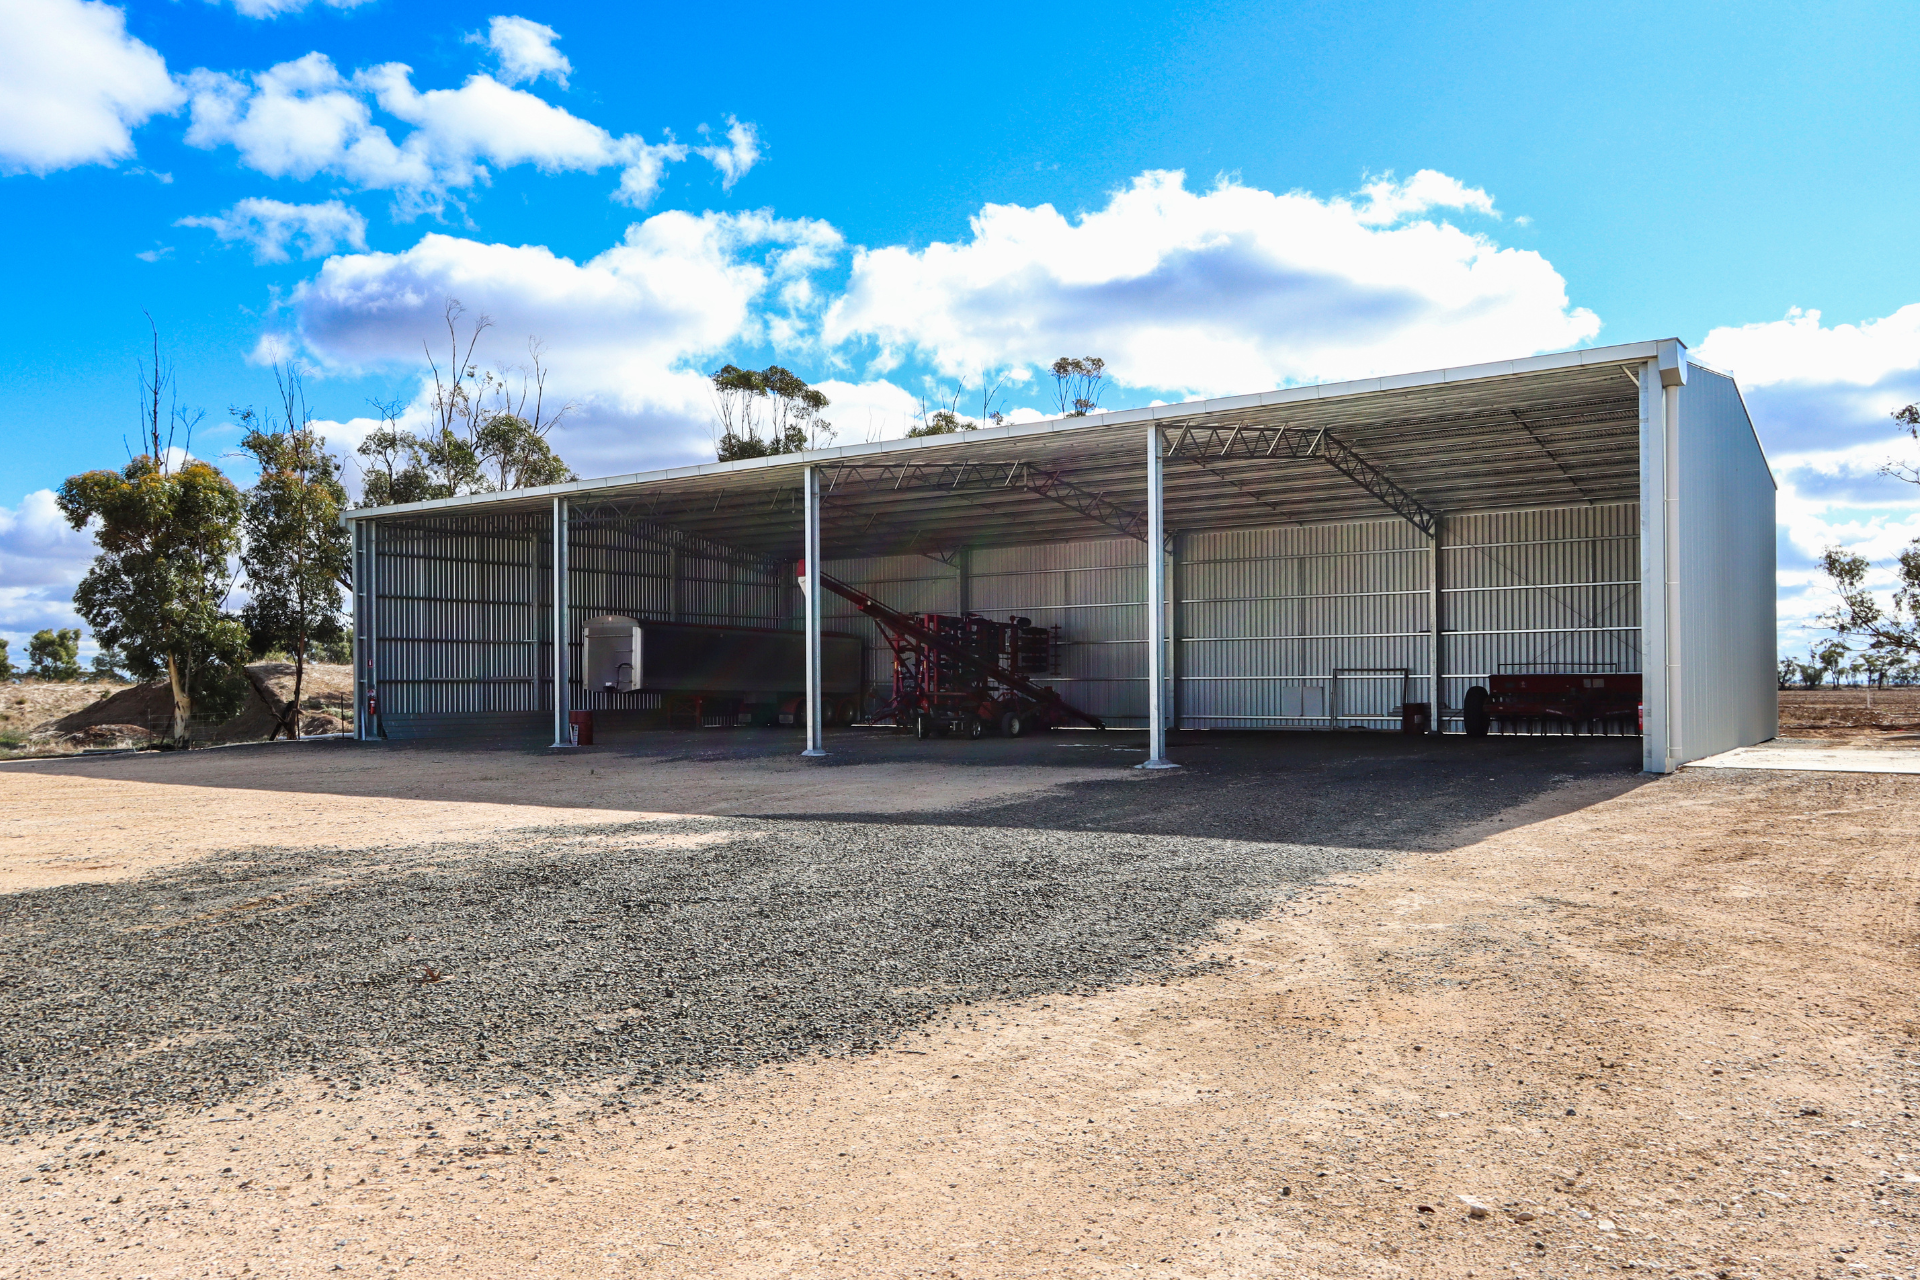 A 32m x 18m x 6m machinery shed at Beulah VIC